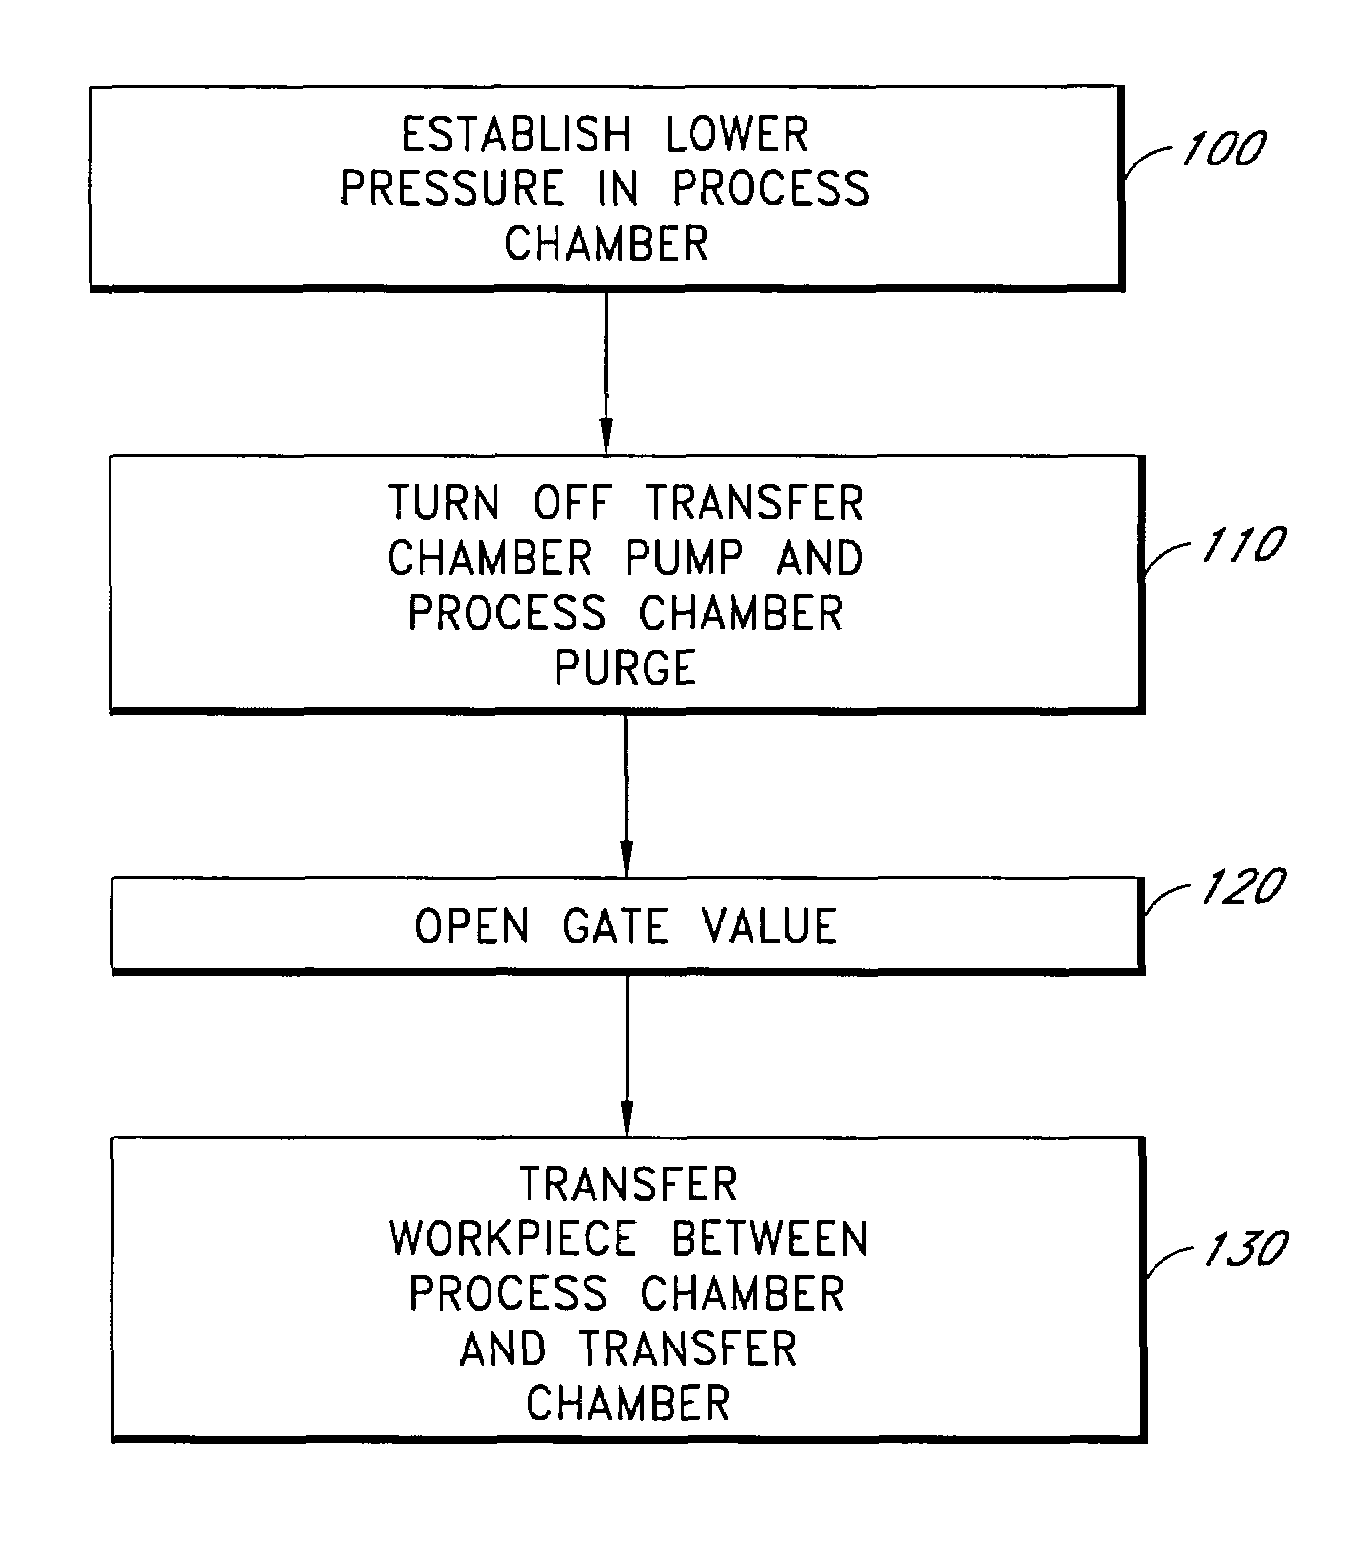 Reduced cross-contamination between chambers in a semiconductor processing tool